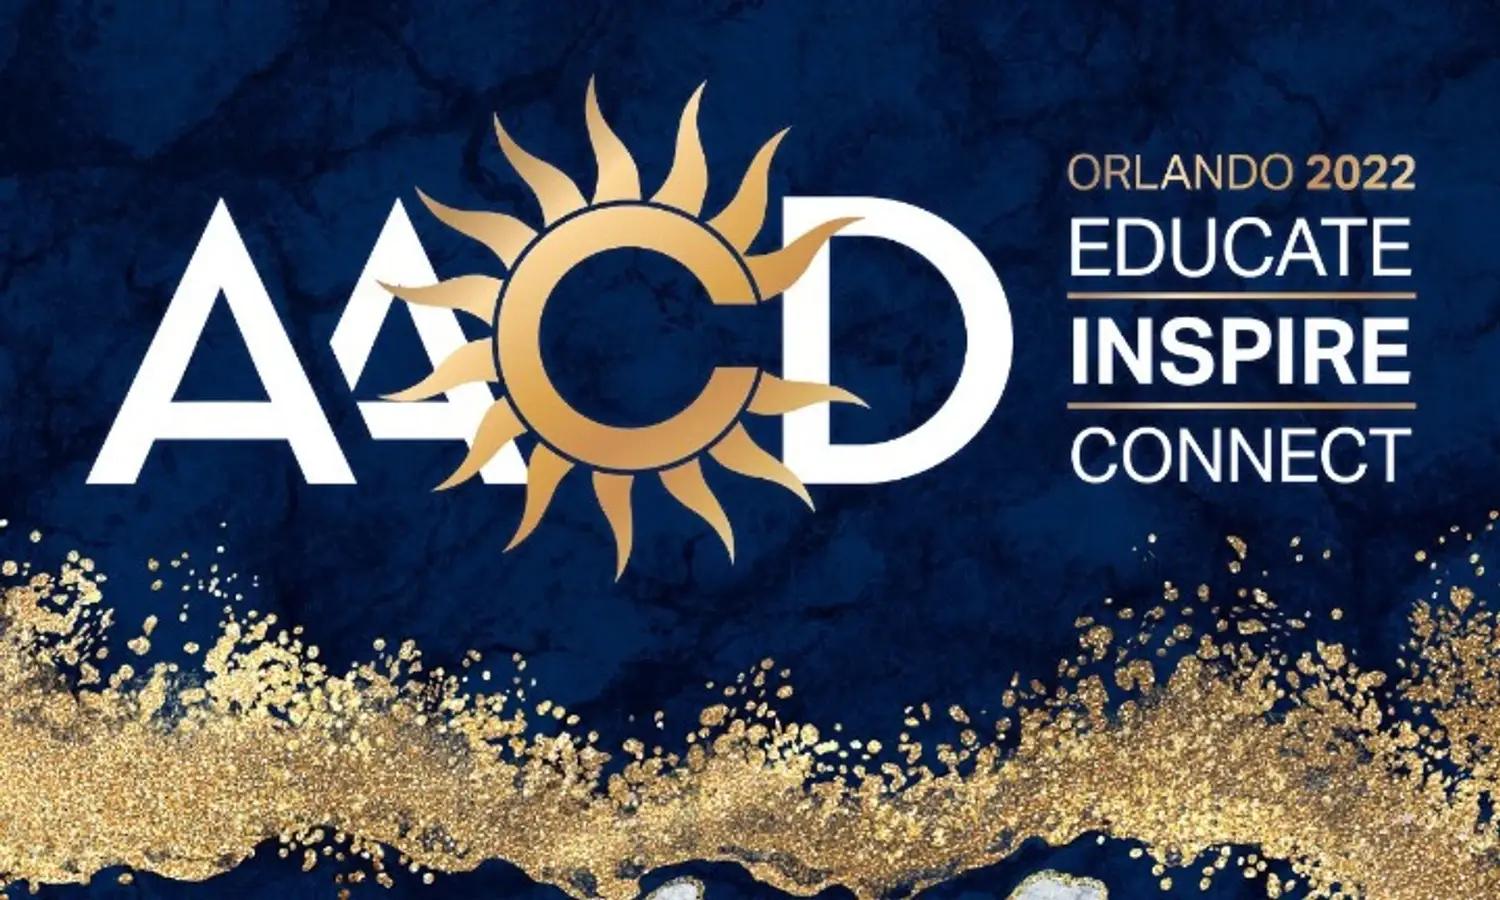 38th Annual American Academy of Cosmetic Dentistry (AACD) Scientific Session